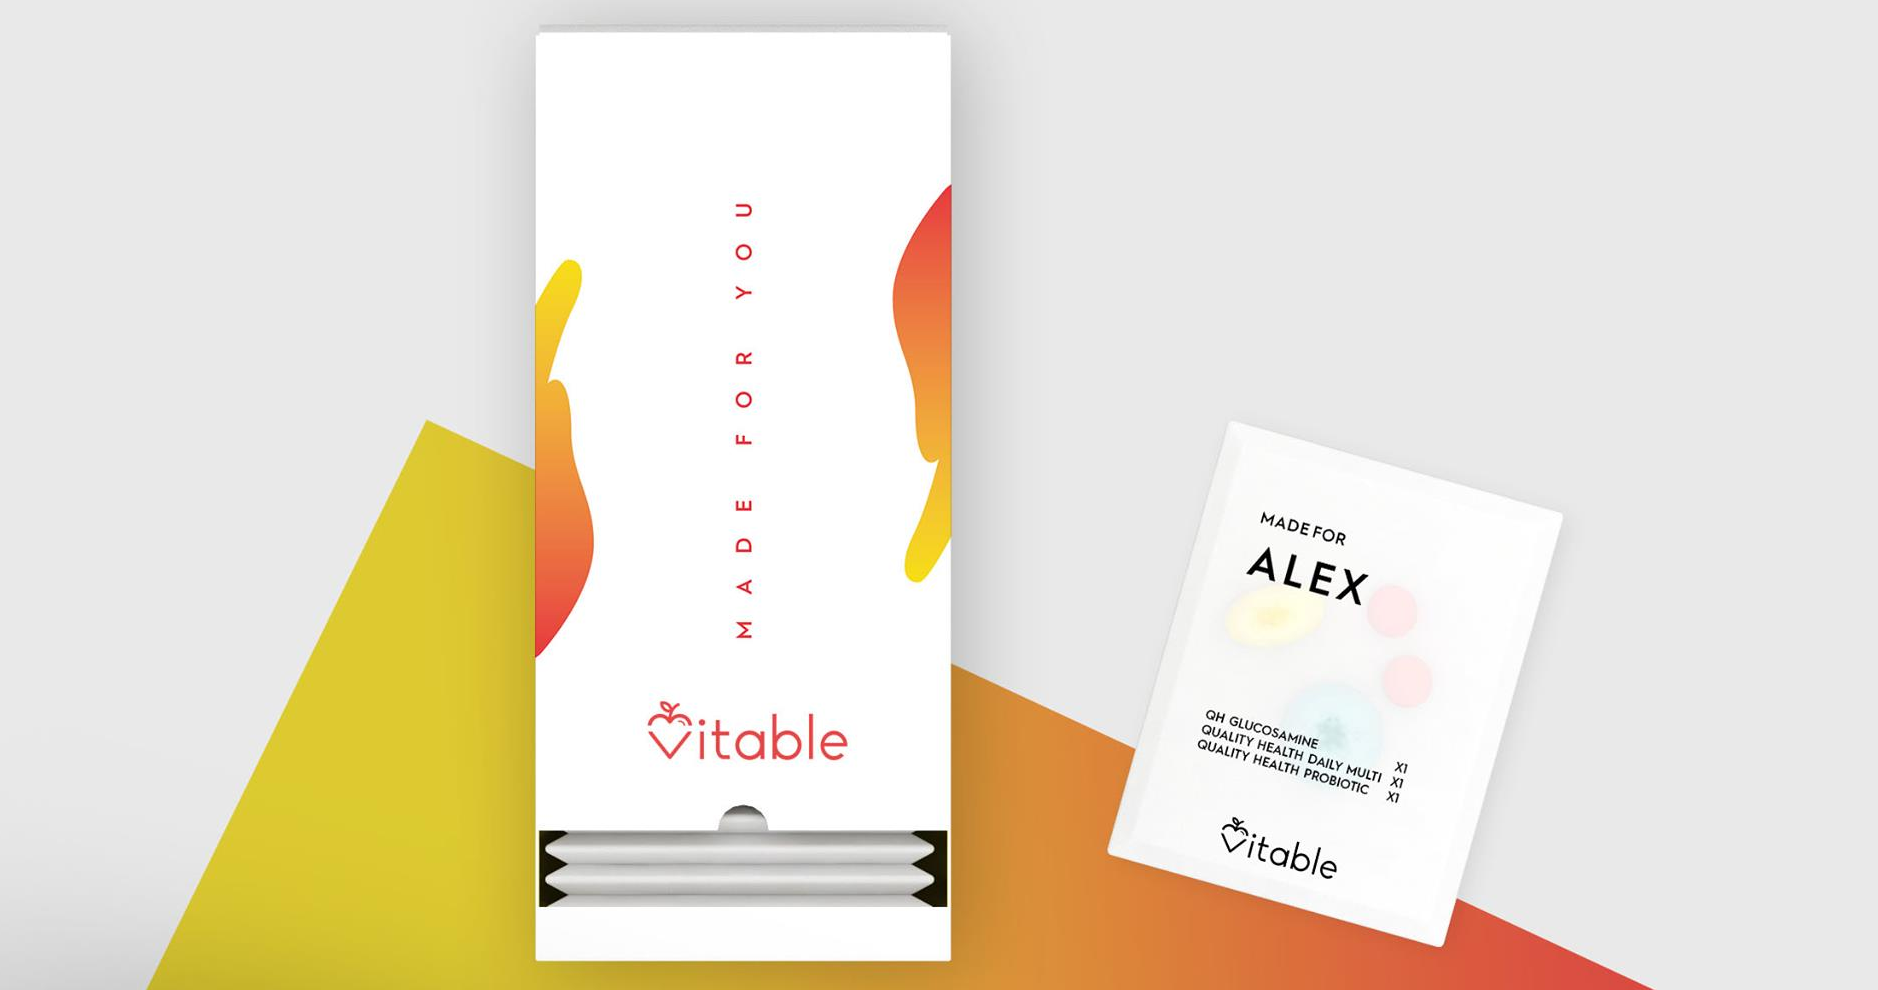 Vitable X SneakQIK Exclusive - Get extra 50% OFF on vegan products